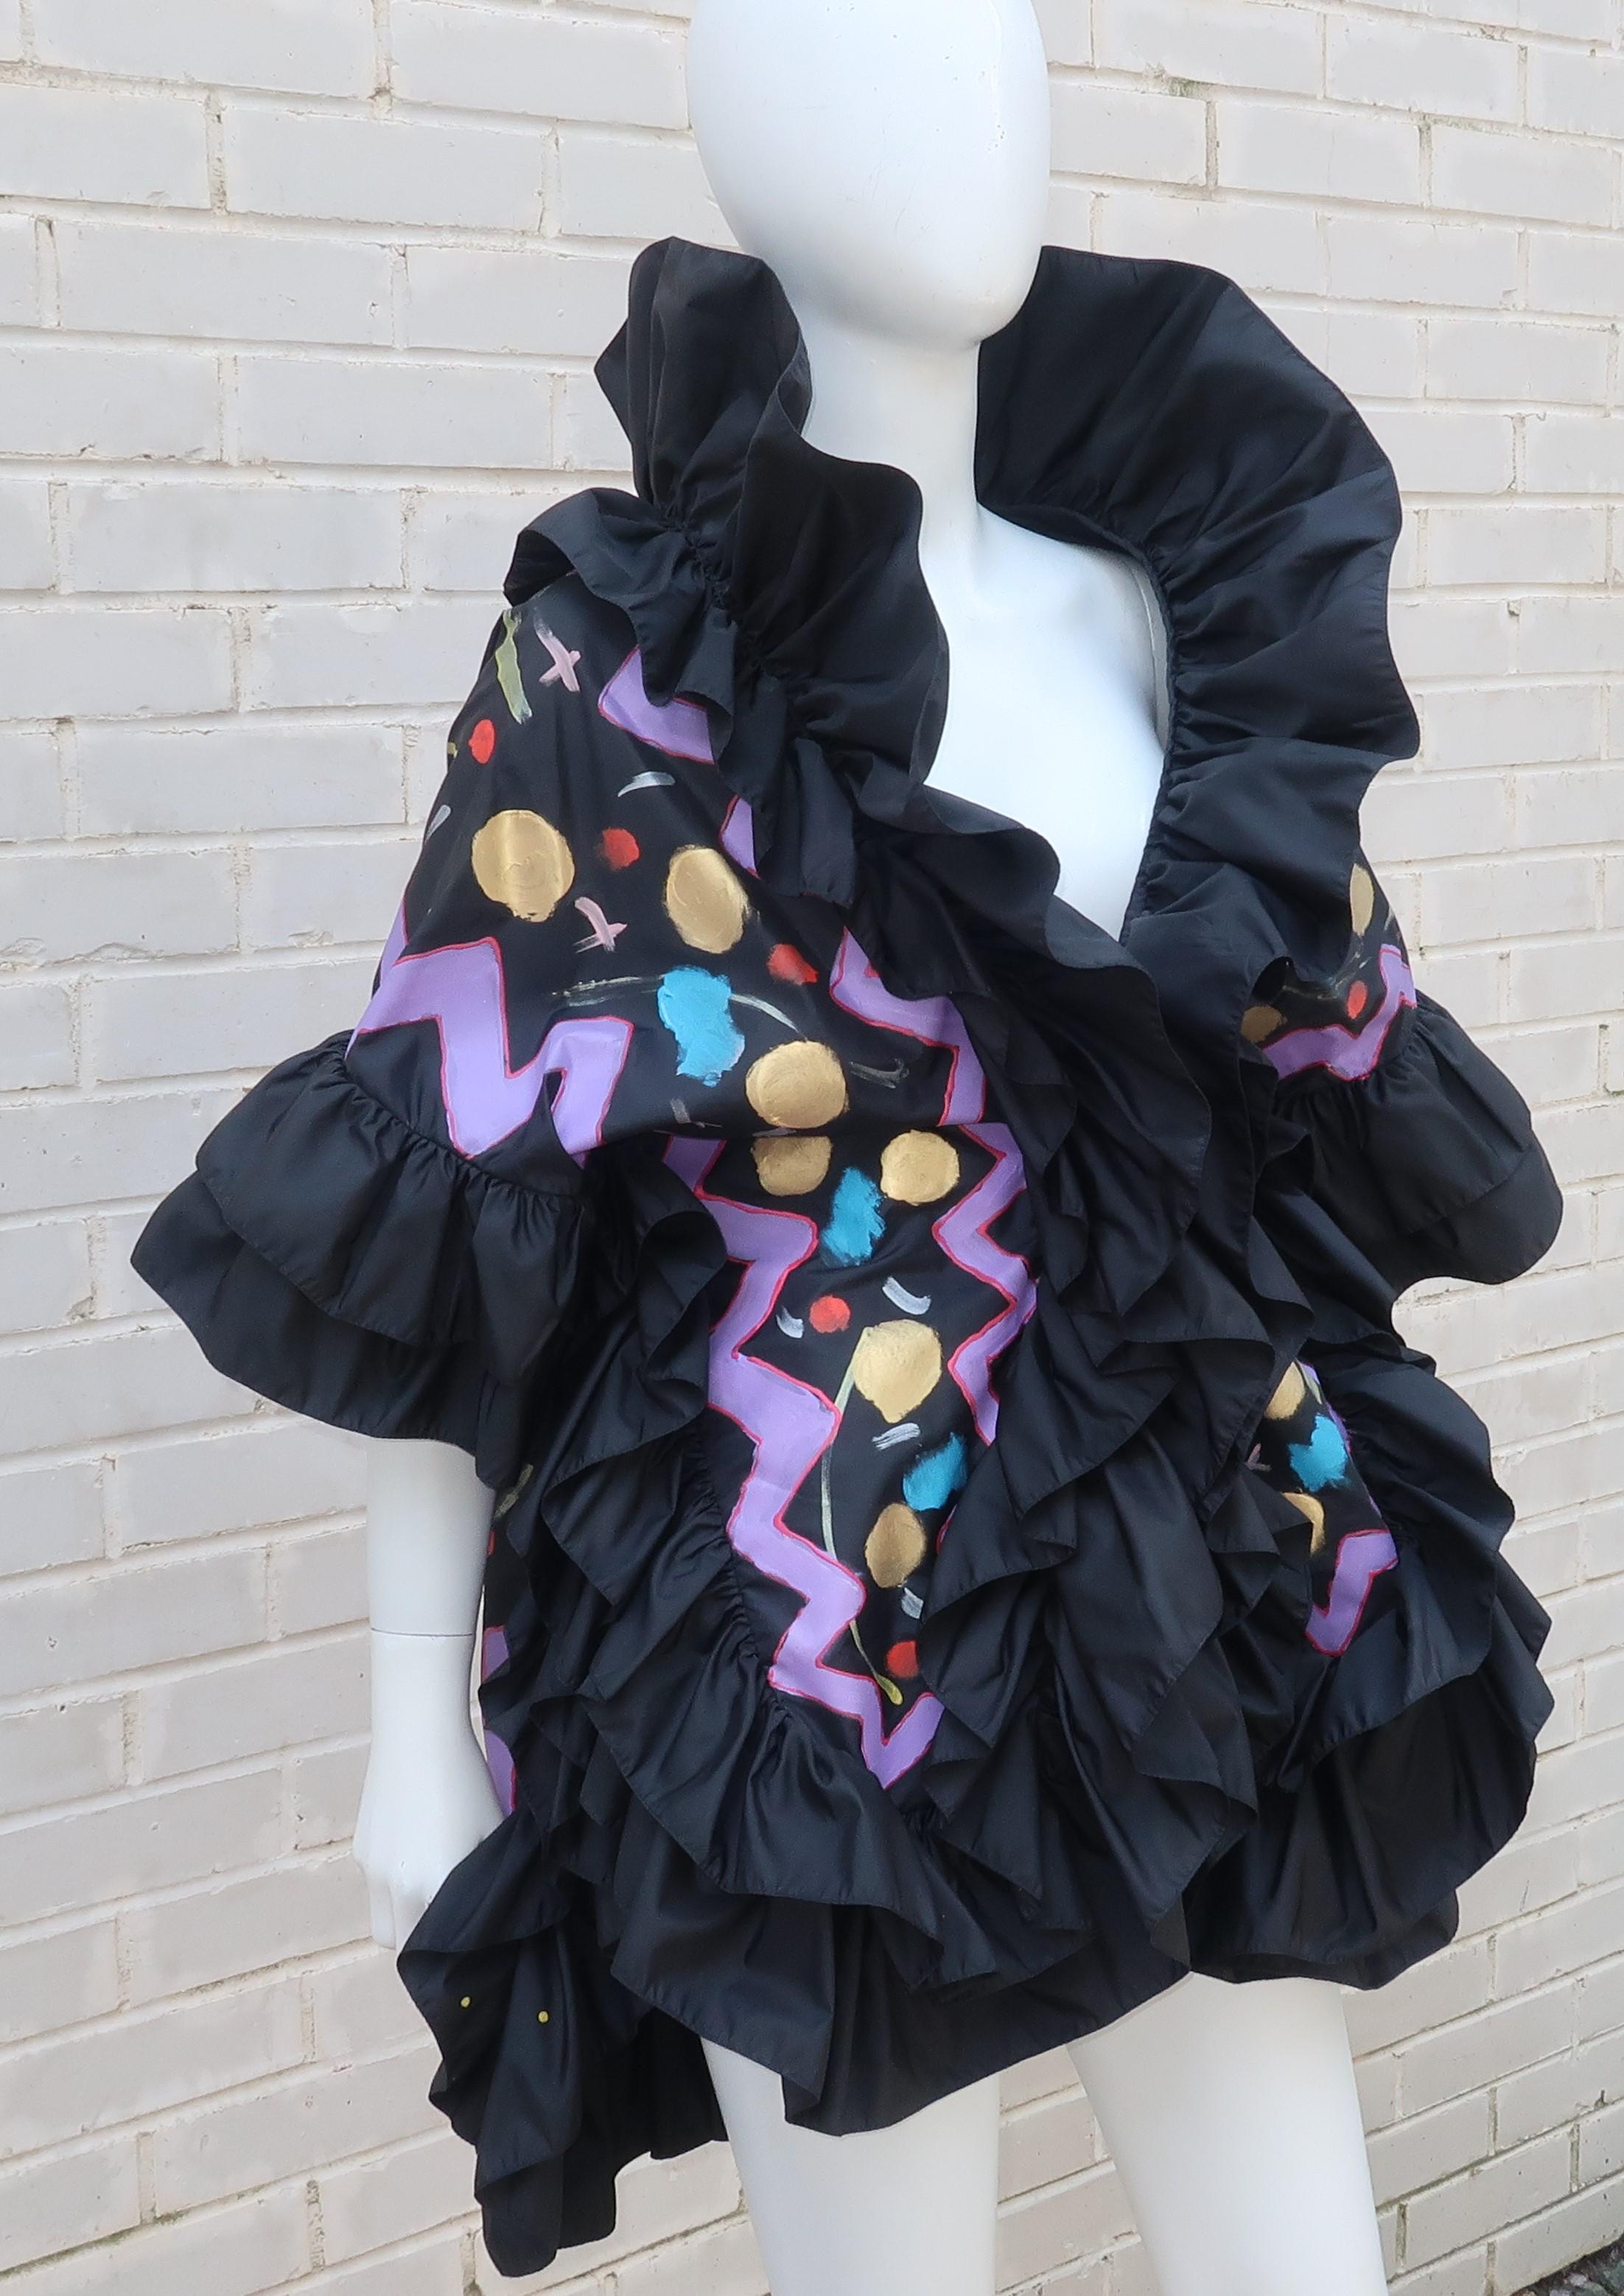 Women's Vintage Colorful Hand Painted Black Taffeta Wrap Jacket With Ruffles